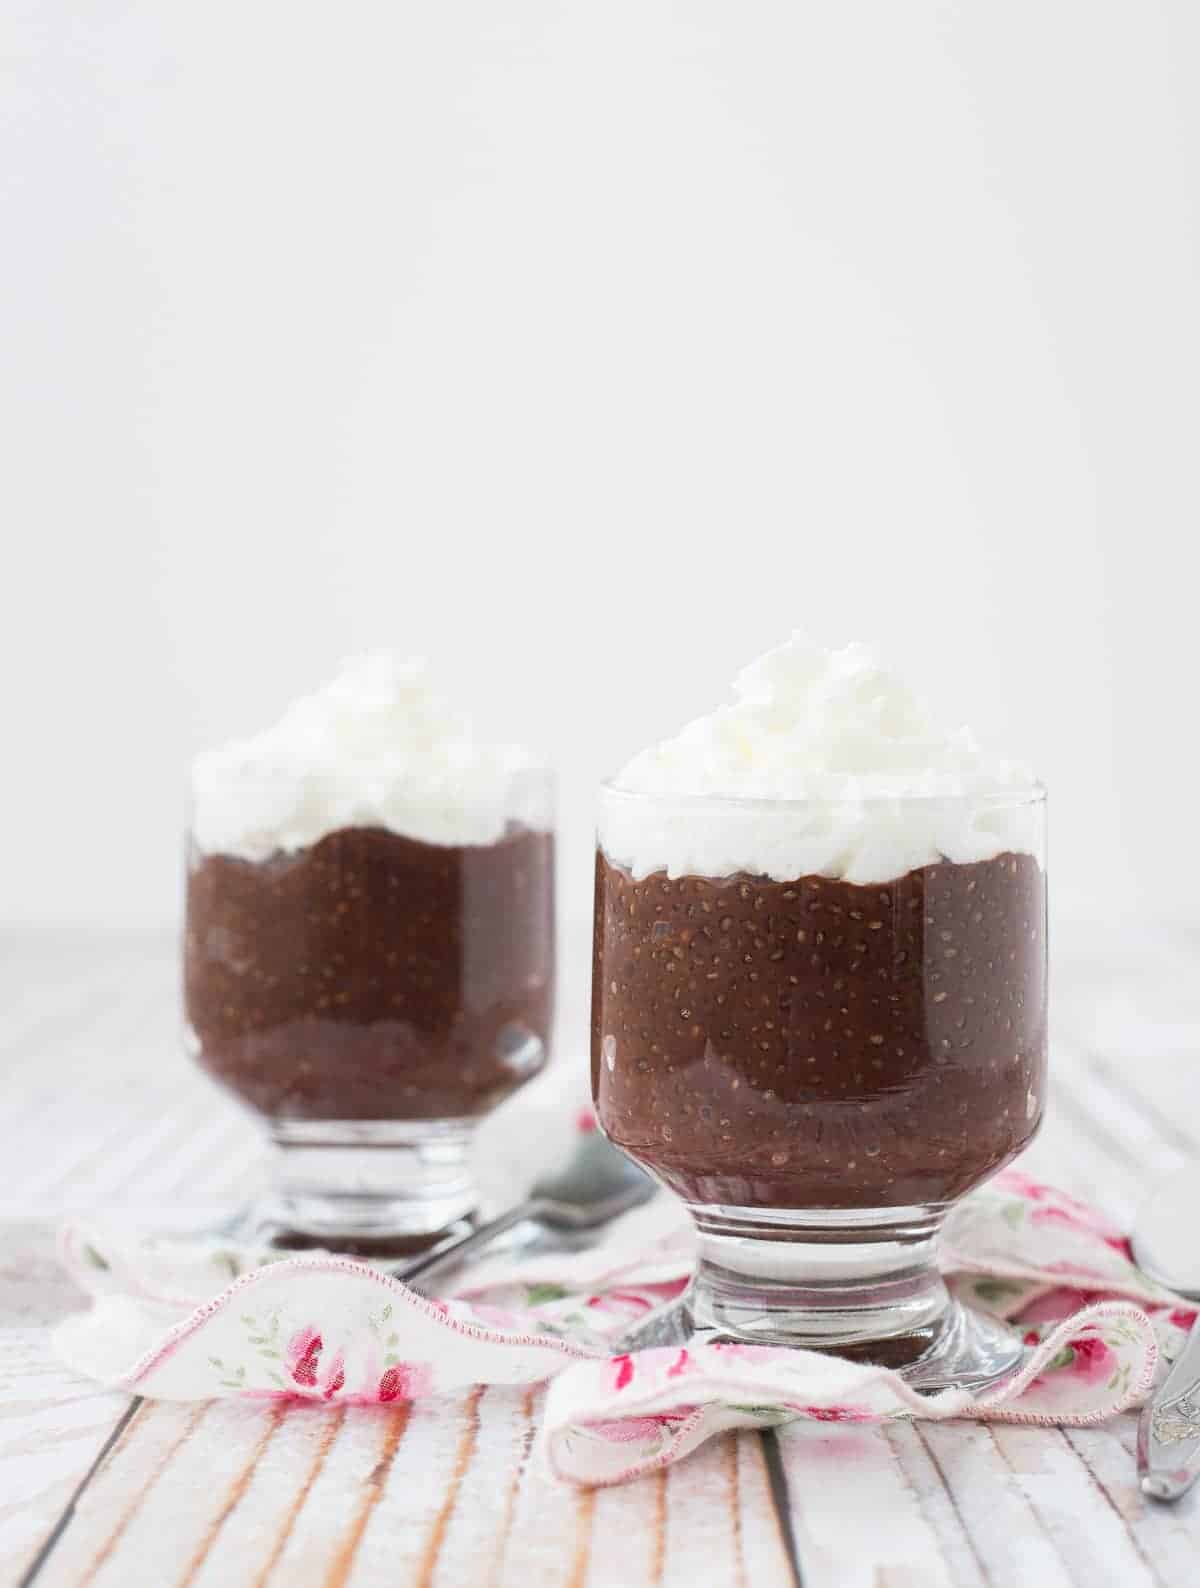 cups of Chocolate Chia Pudding with whipped cream on top; Part of a round-up collection of recipes compiled by Jane Bonacci, The Heritage Cook, 15 Chocolate Desserts for your Holiday Table. 